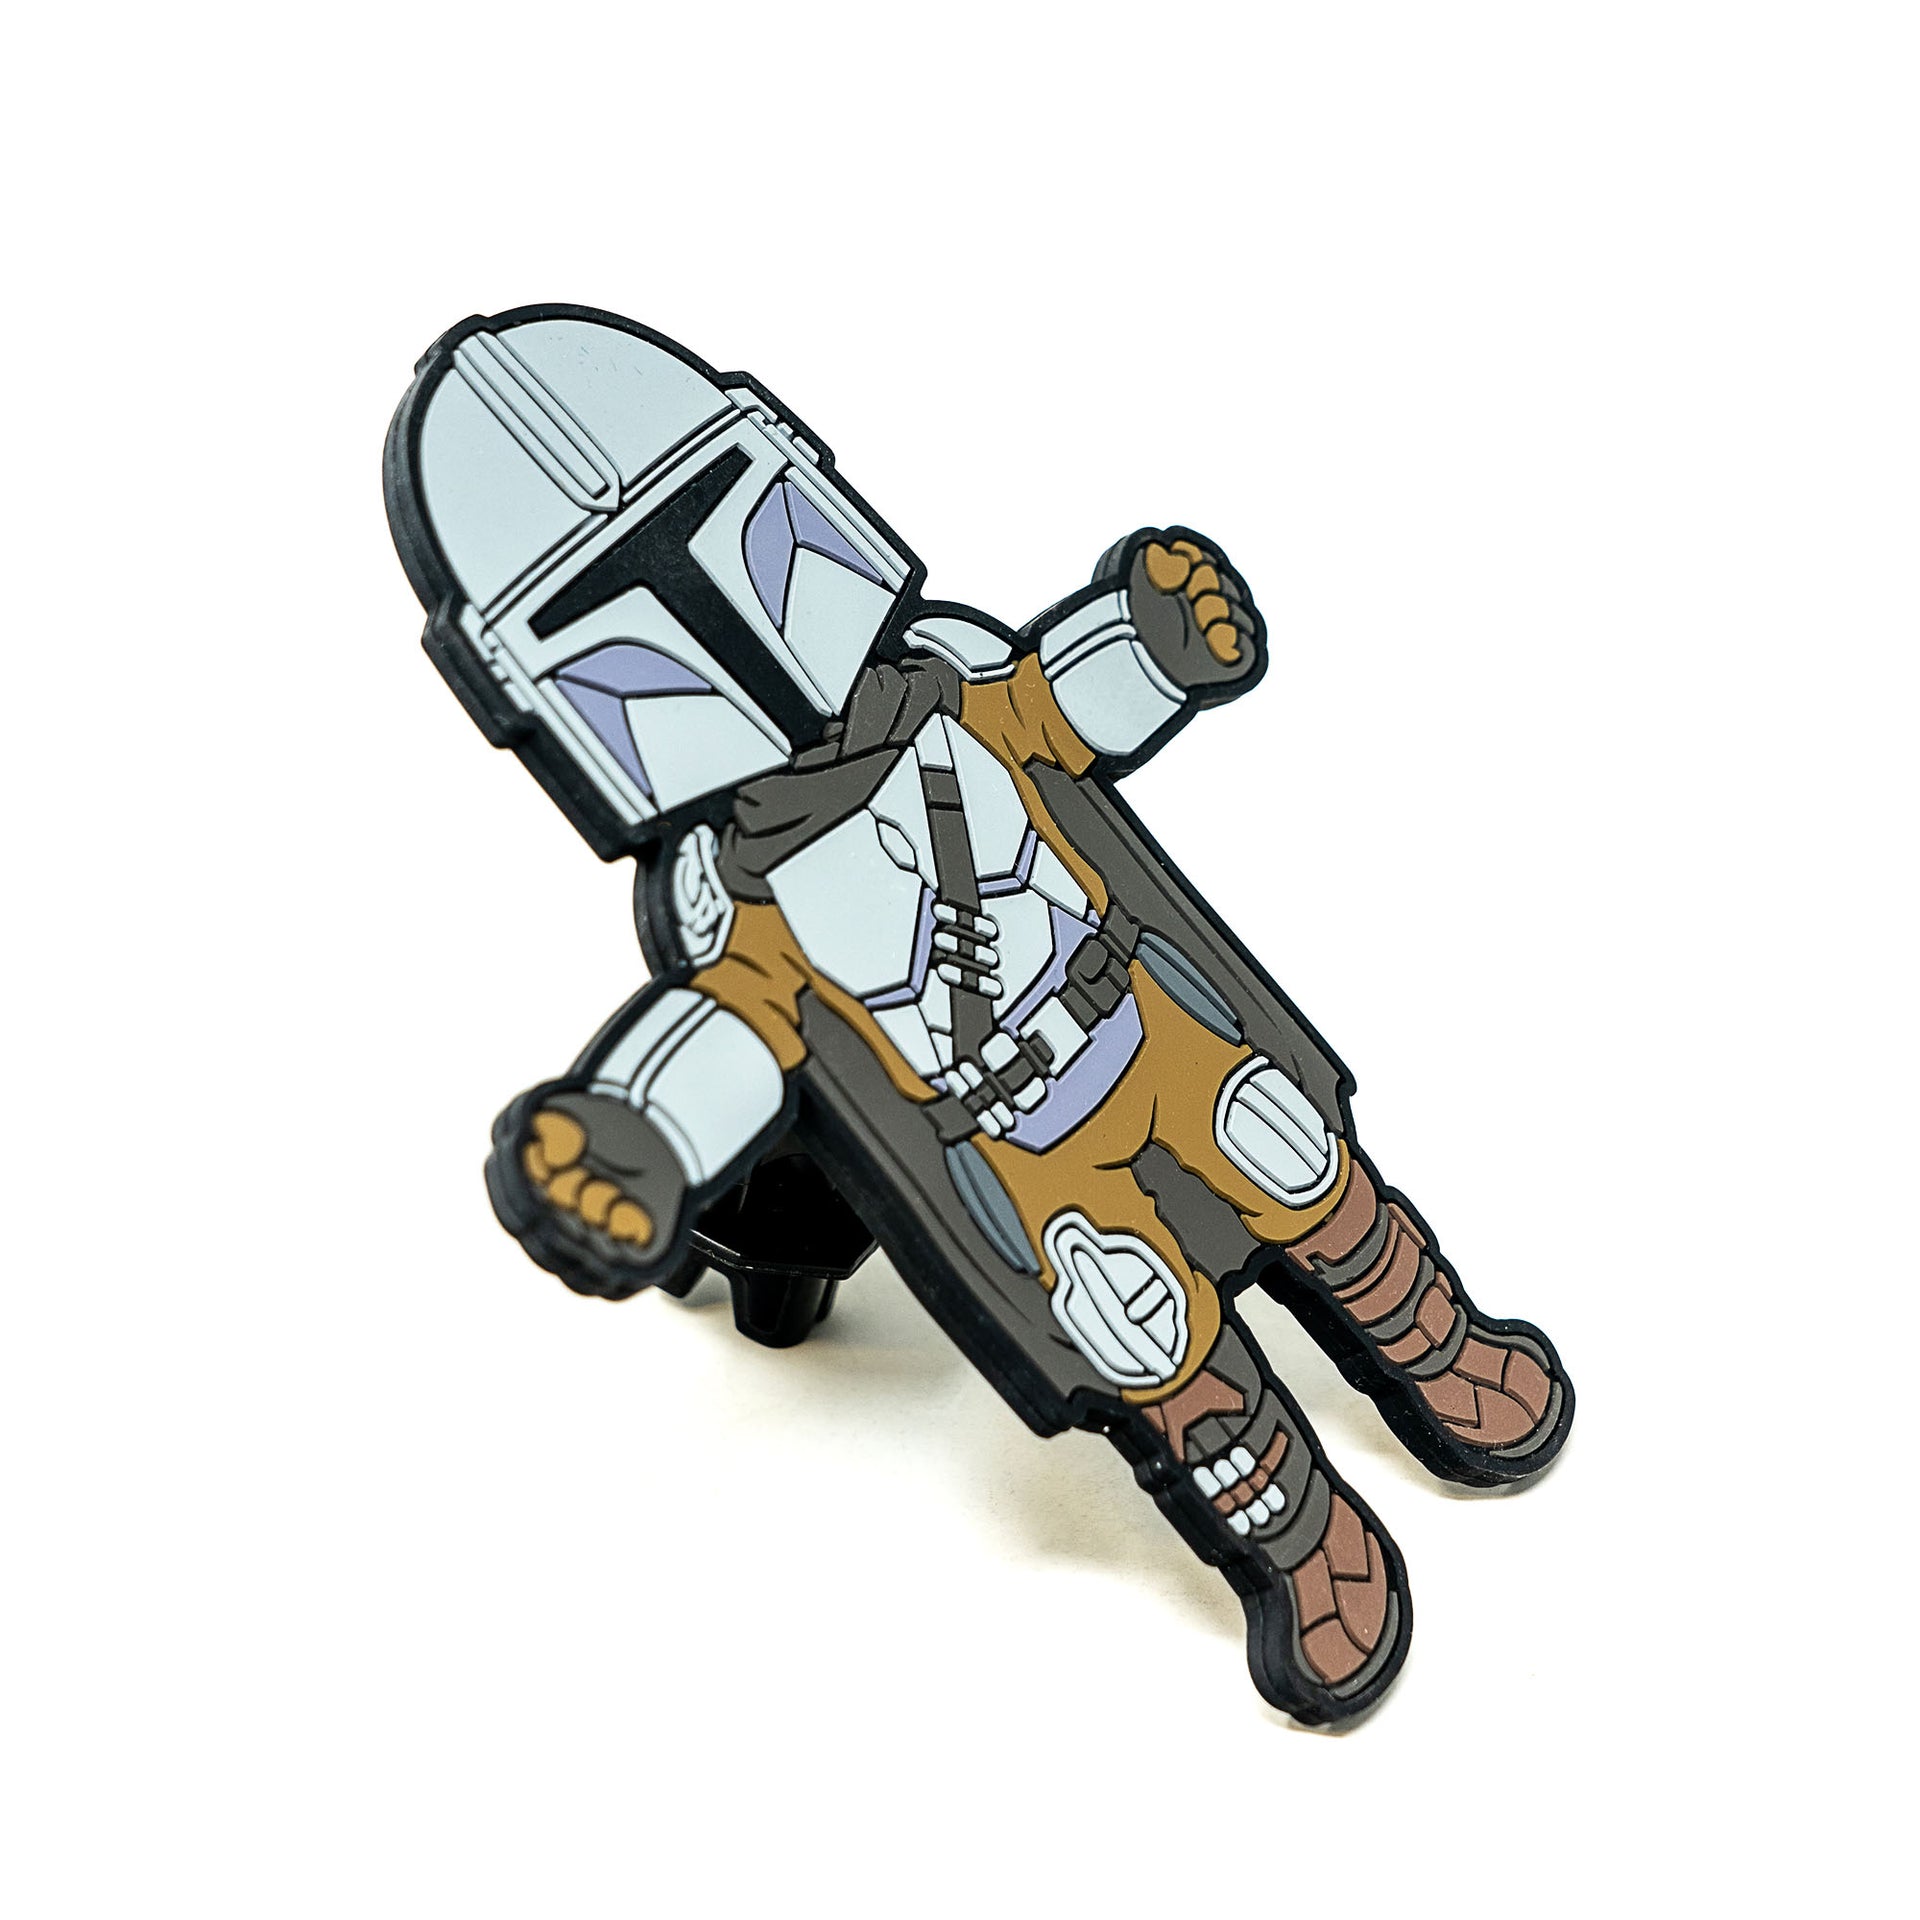 Image of Star Wars The Mandalorian Hug Buddy on a white background, resting on its vent clip, viewed from a 45 degree side angle